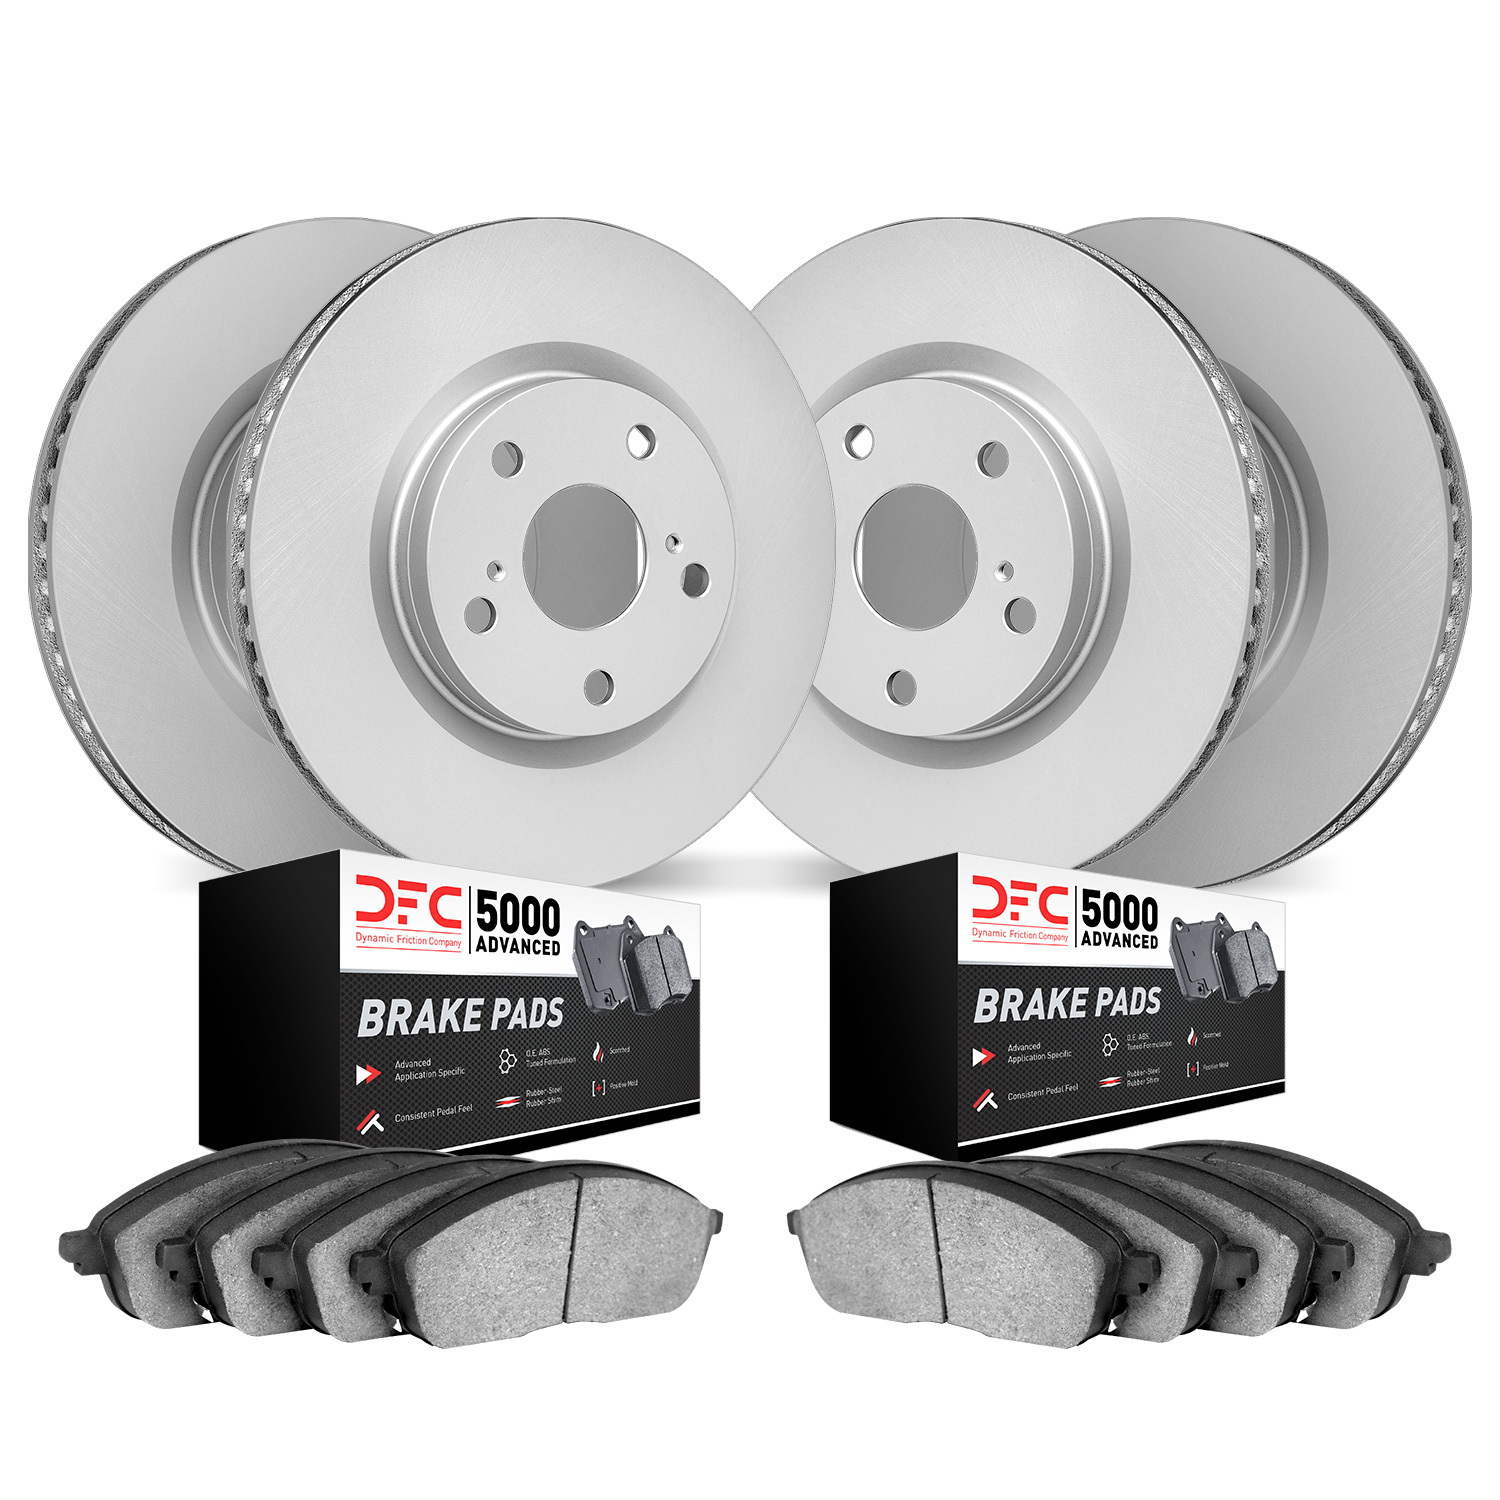 4504-63079 Geospec Brake Rotors w/5000 Advanced Brake Pads Kit, 2013-2016 Mercedes-Benz, Position: Front and Rear